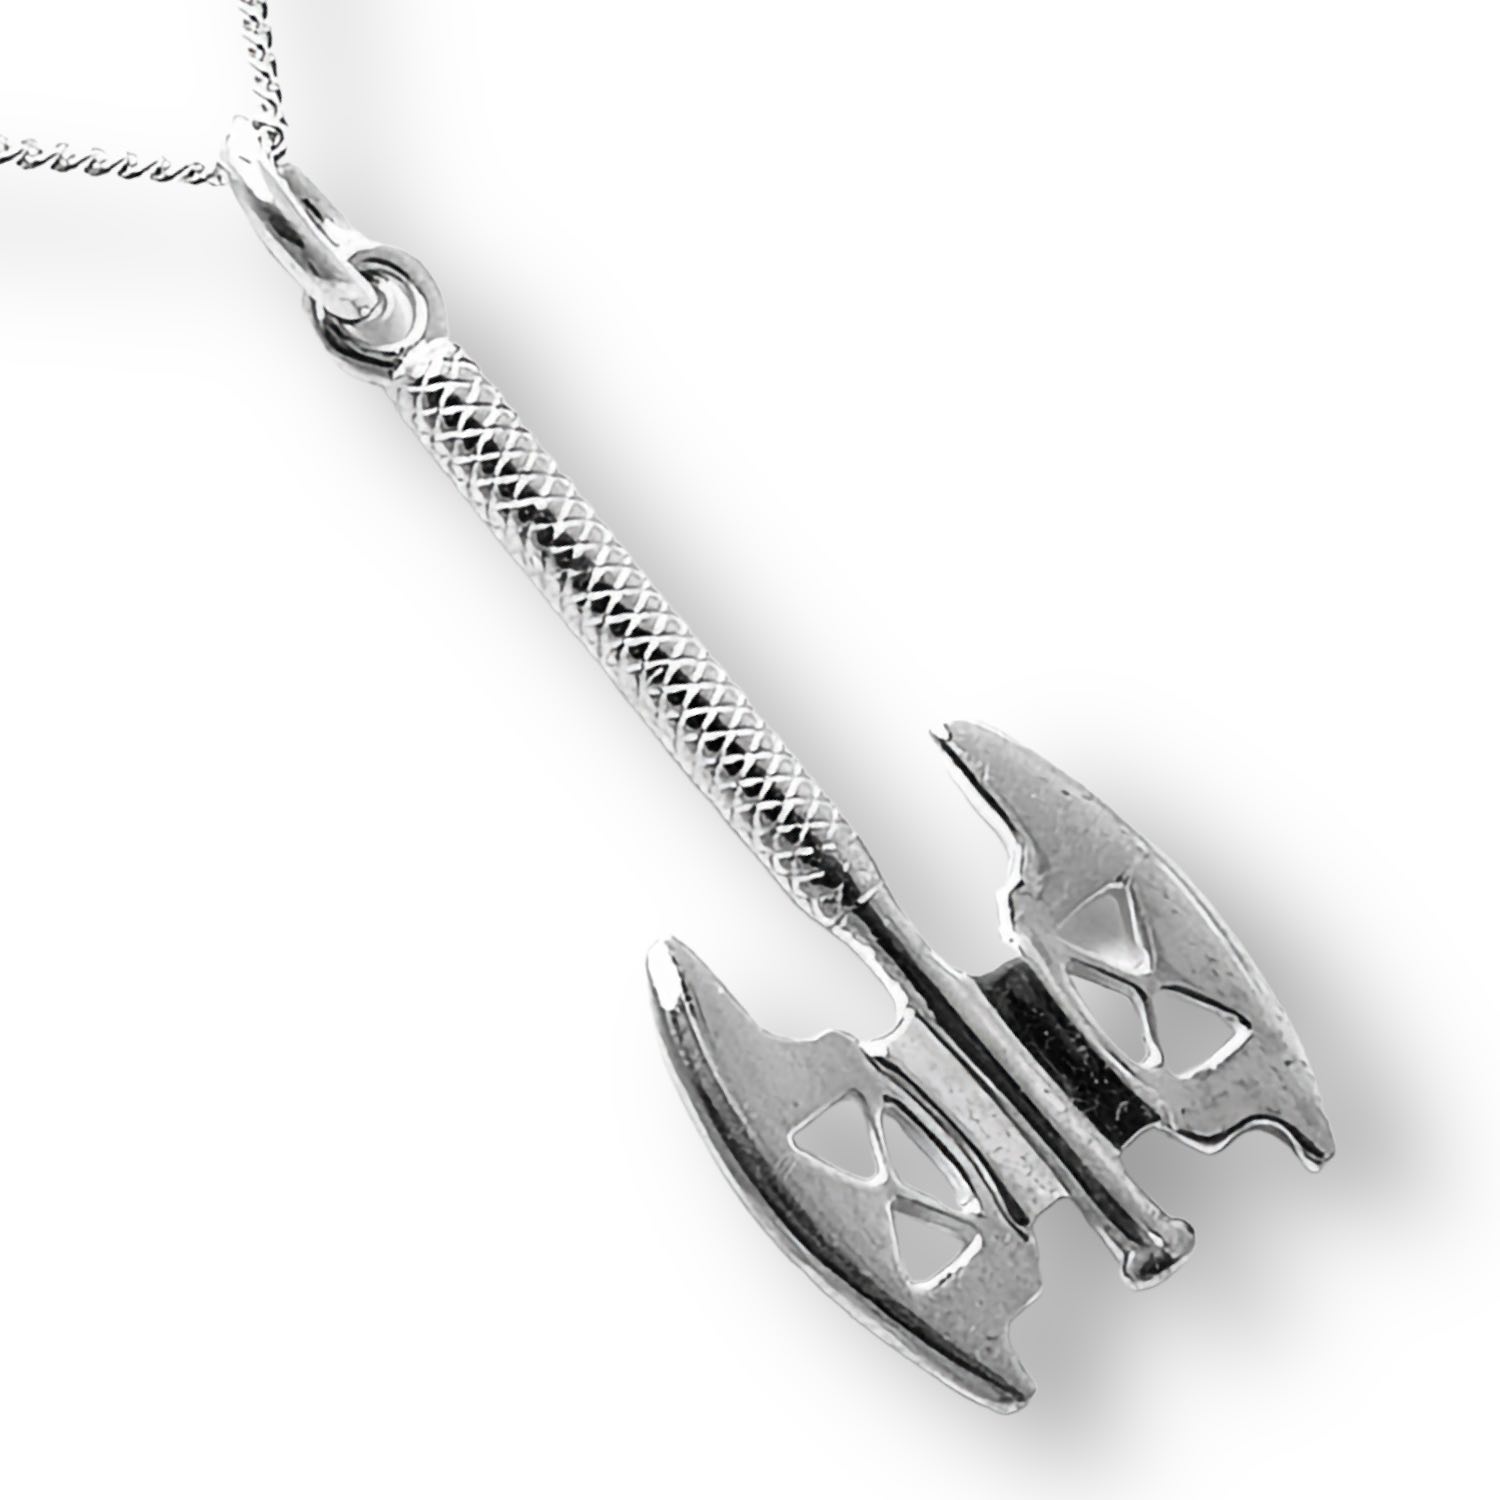 Celebrate the fierce warrior and loyal member of the Fellowship of the Ring with this officially licensed Gimli's Axe silver pendant. 